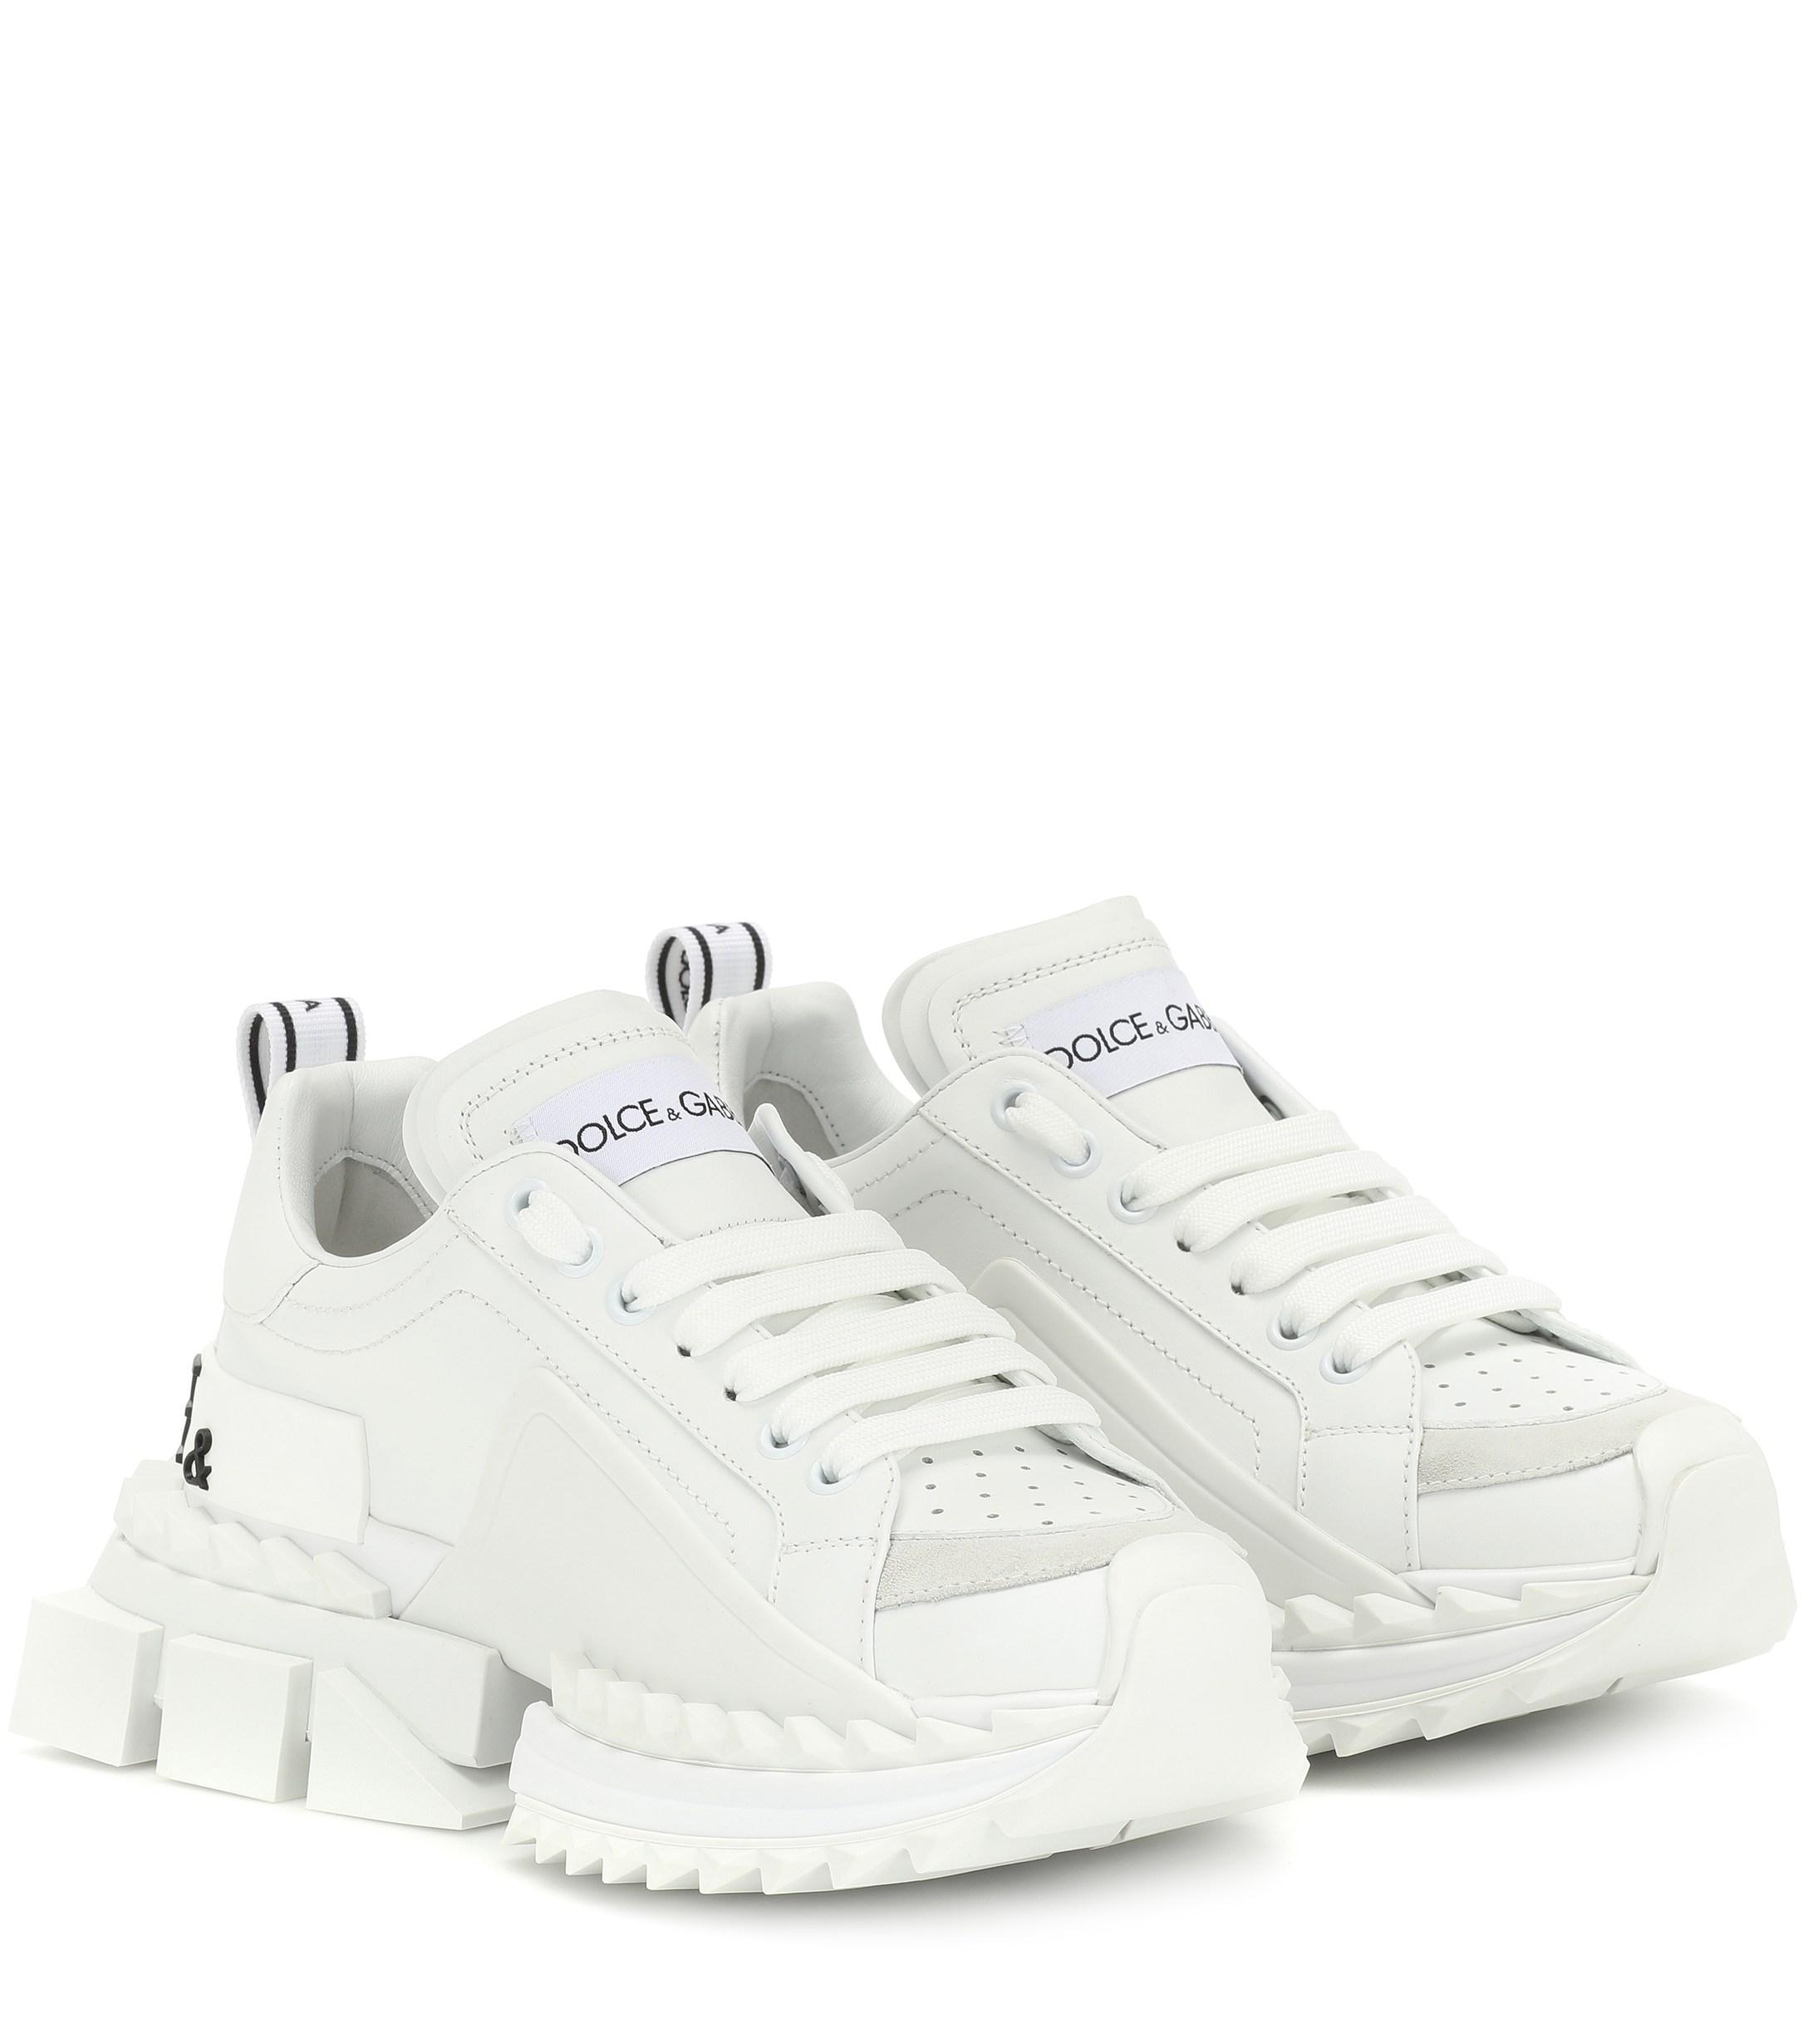 Dolce & Gabbana Super Queen Leather Sneakers in White - Save 52% - Lyst